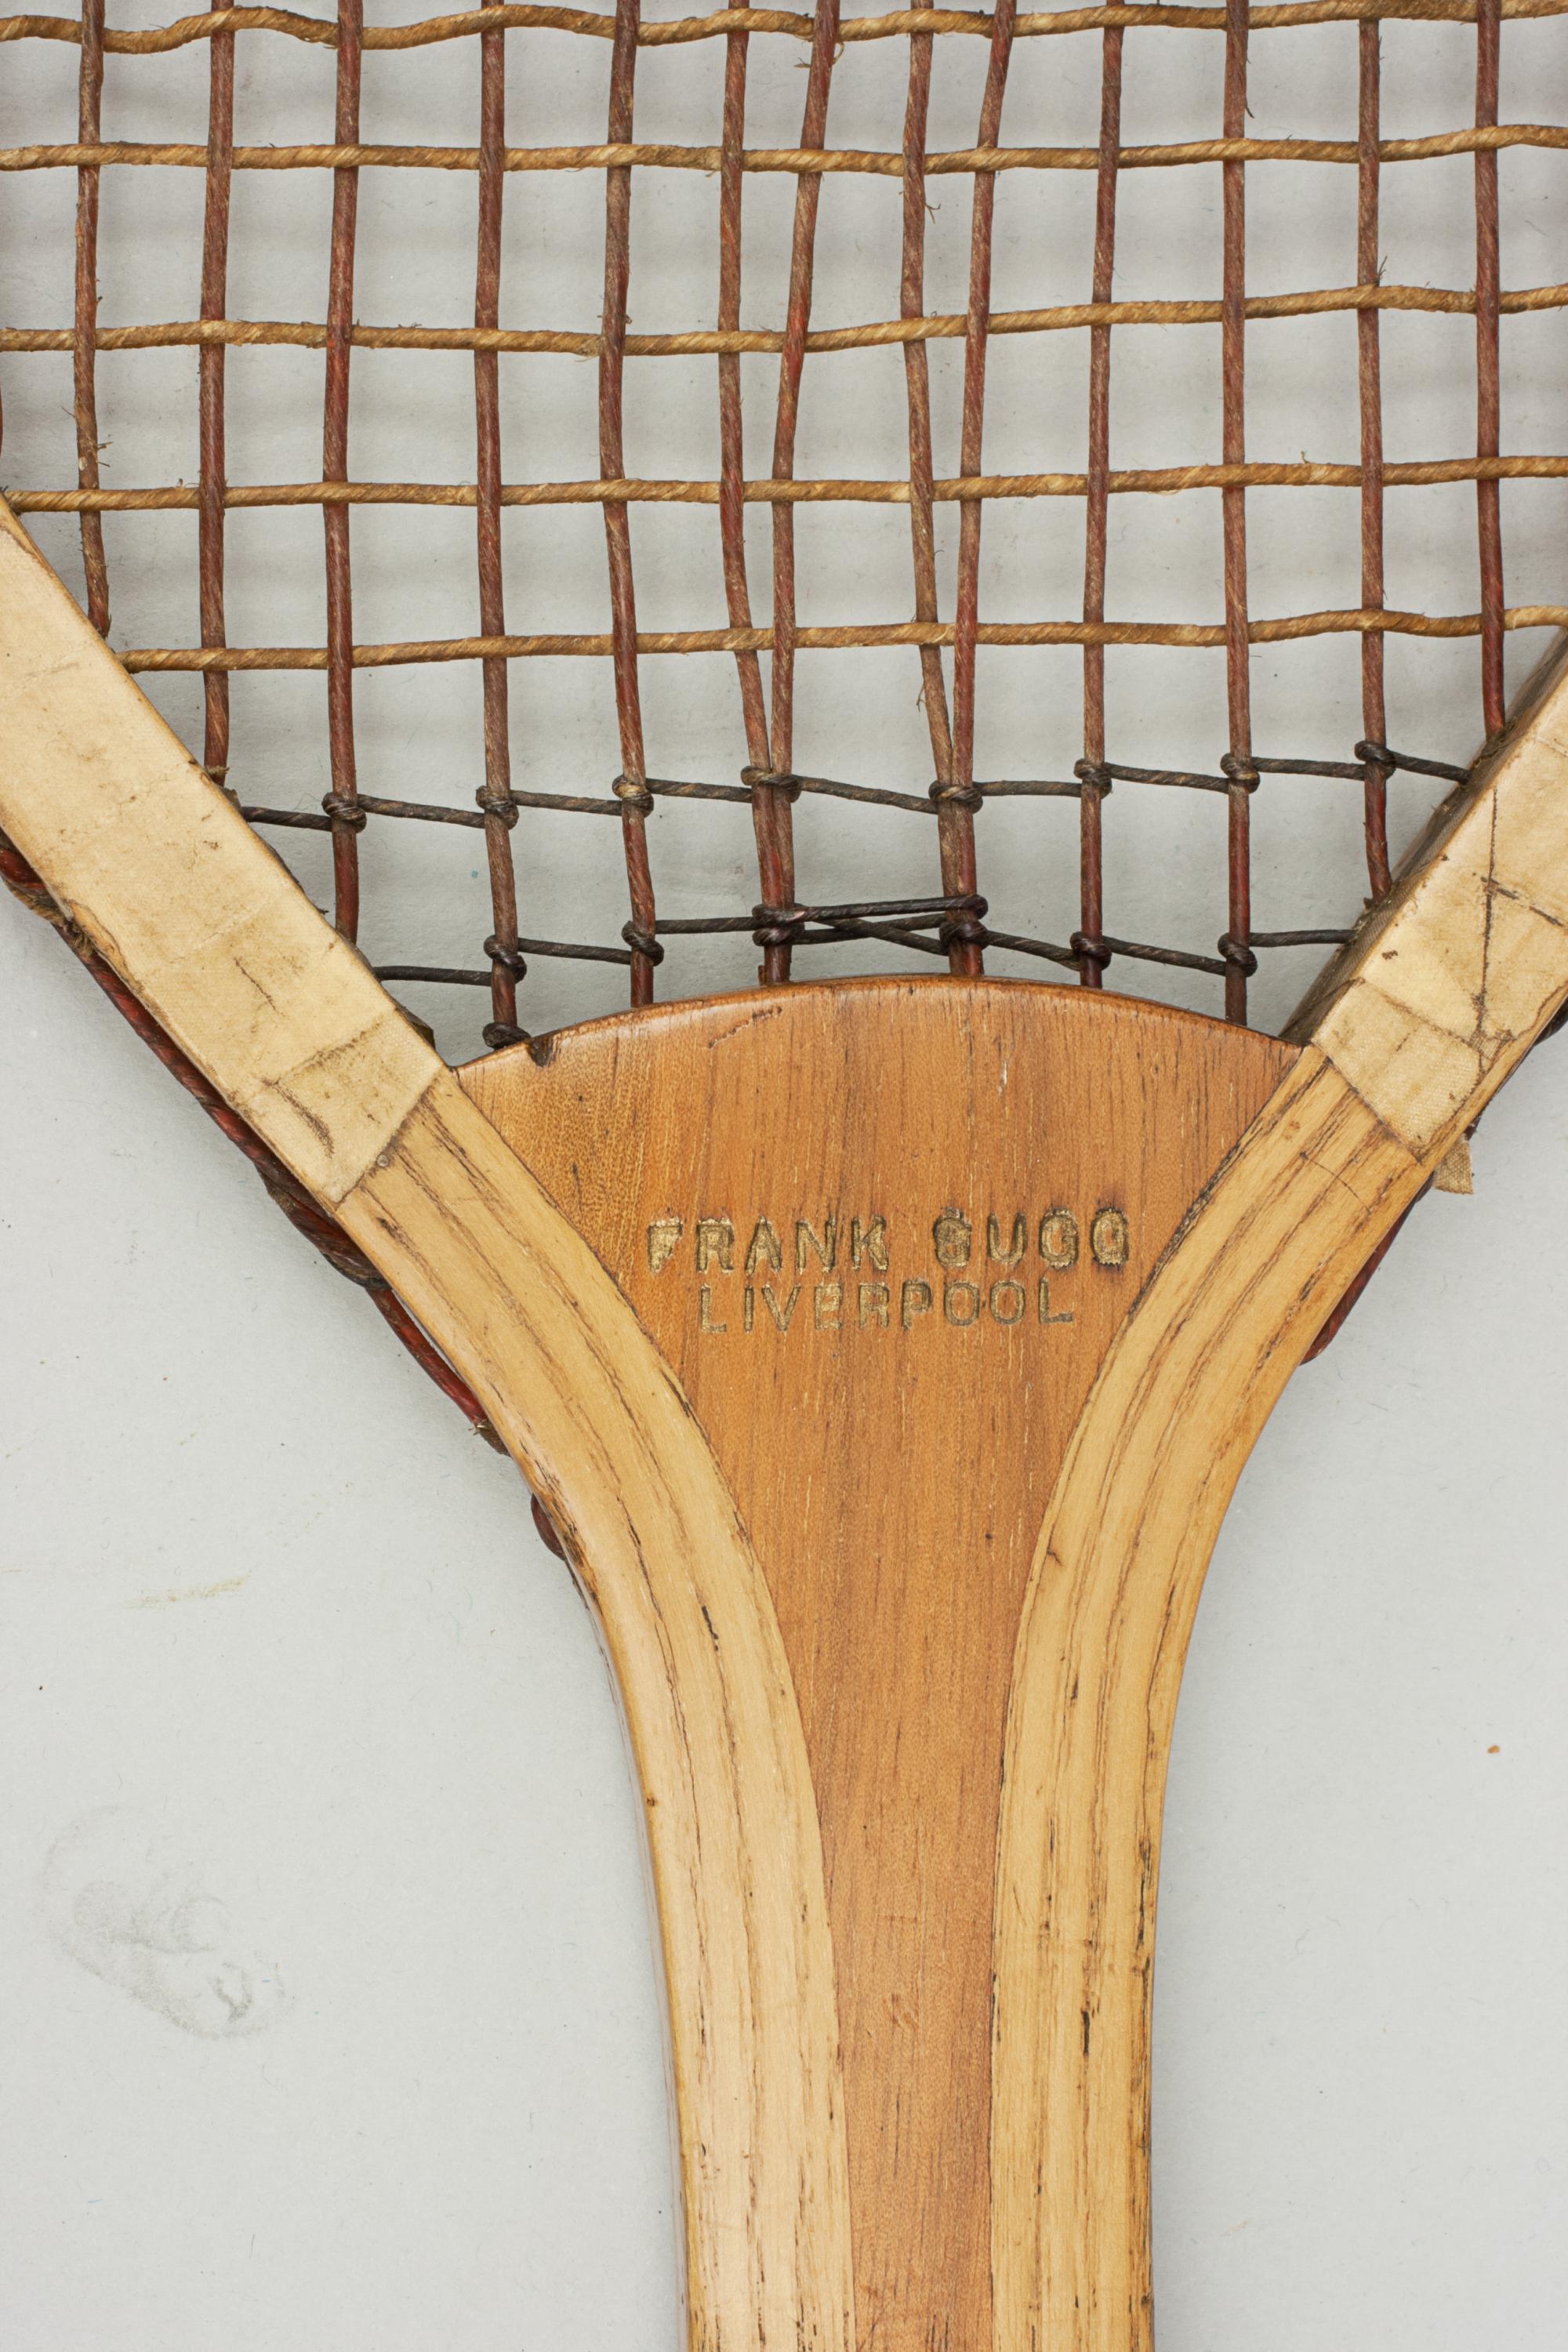 Early 20th Century Antique Lawn Tennis Racket, Frank Sugg, Liverpool For Sale